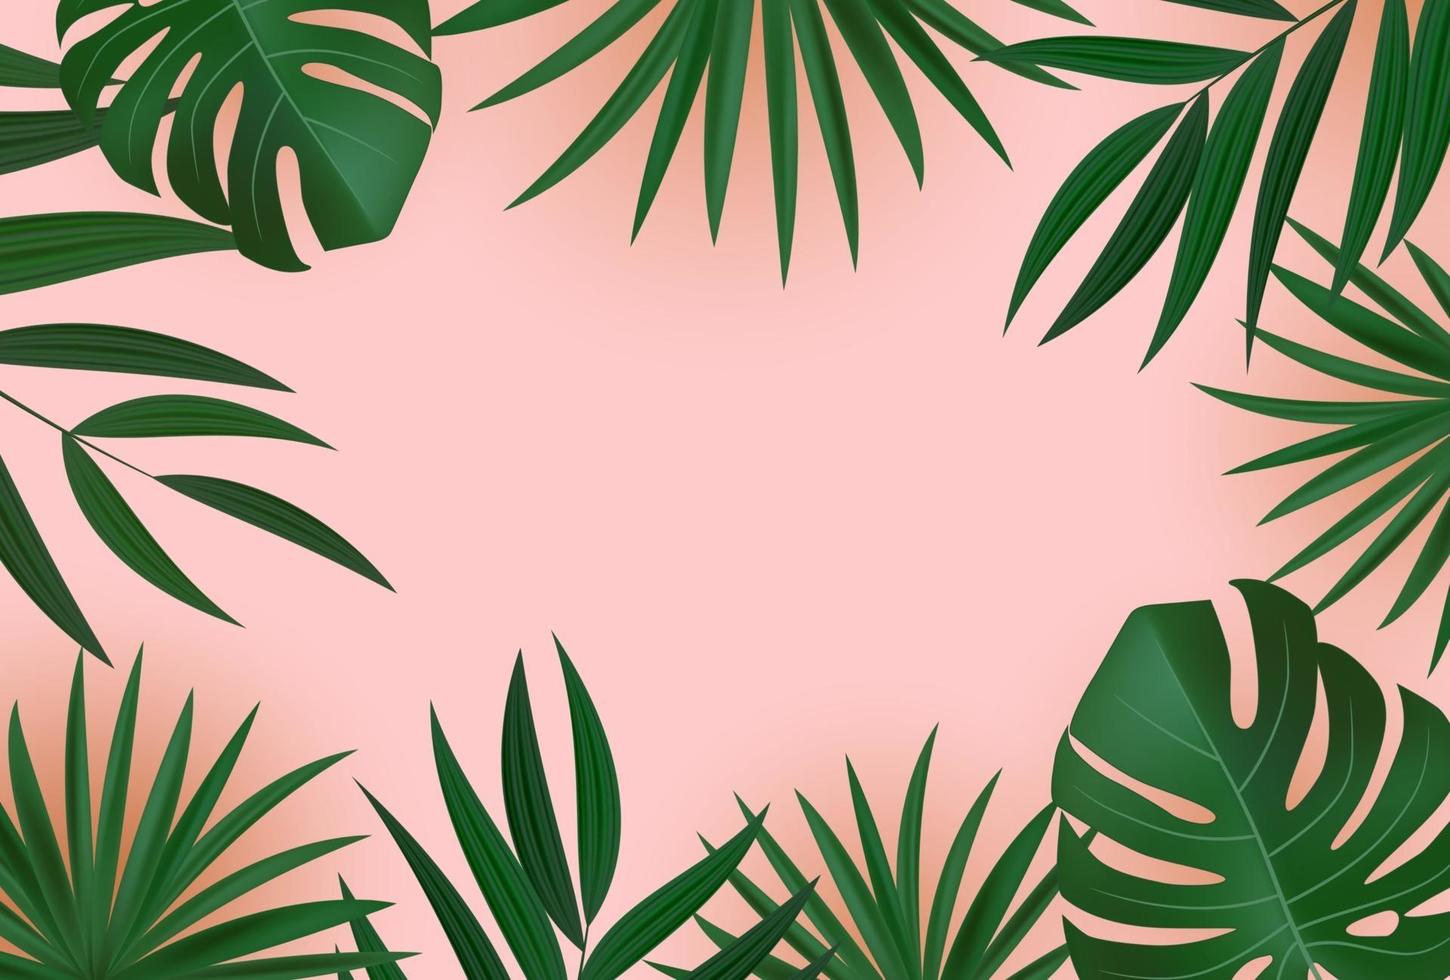 Natural Realistic Green Palm Leaves Tropical Background vector